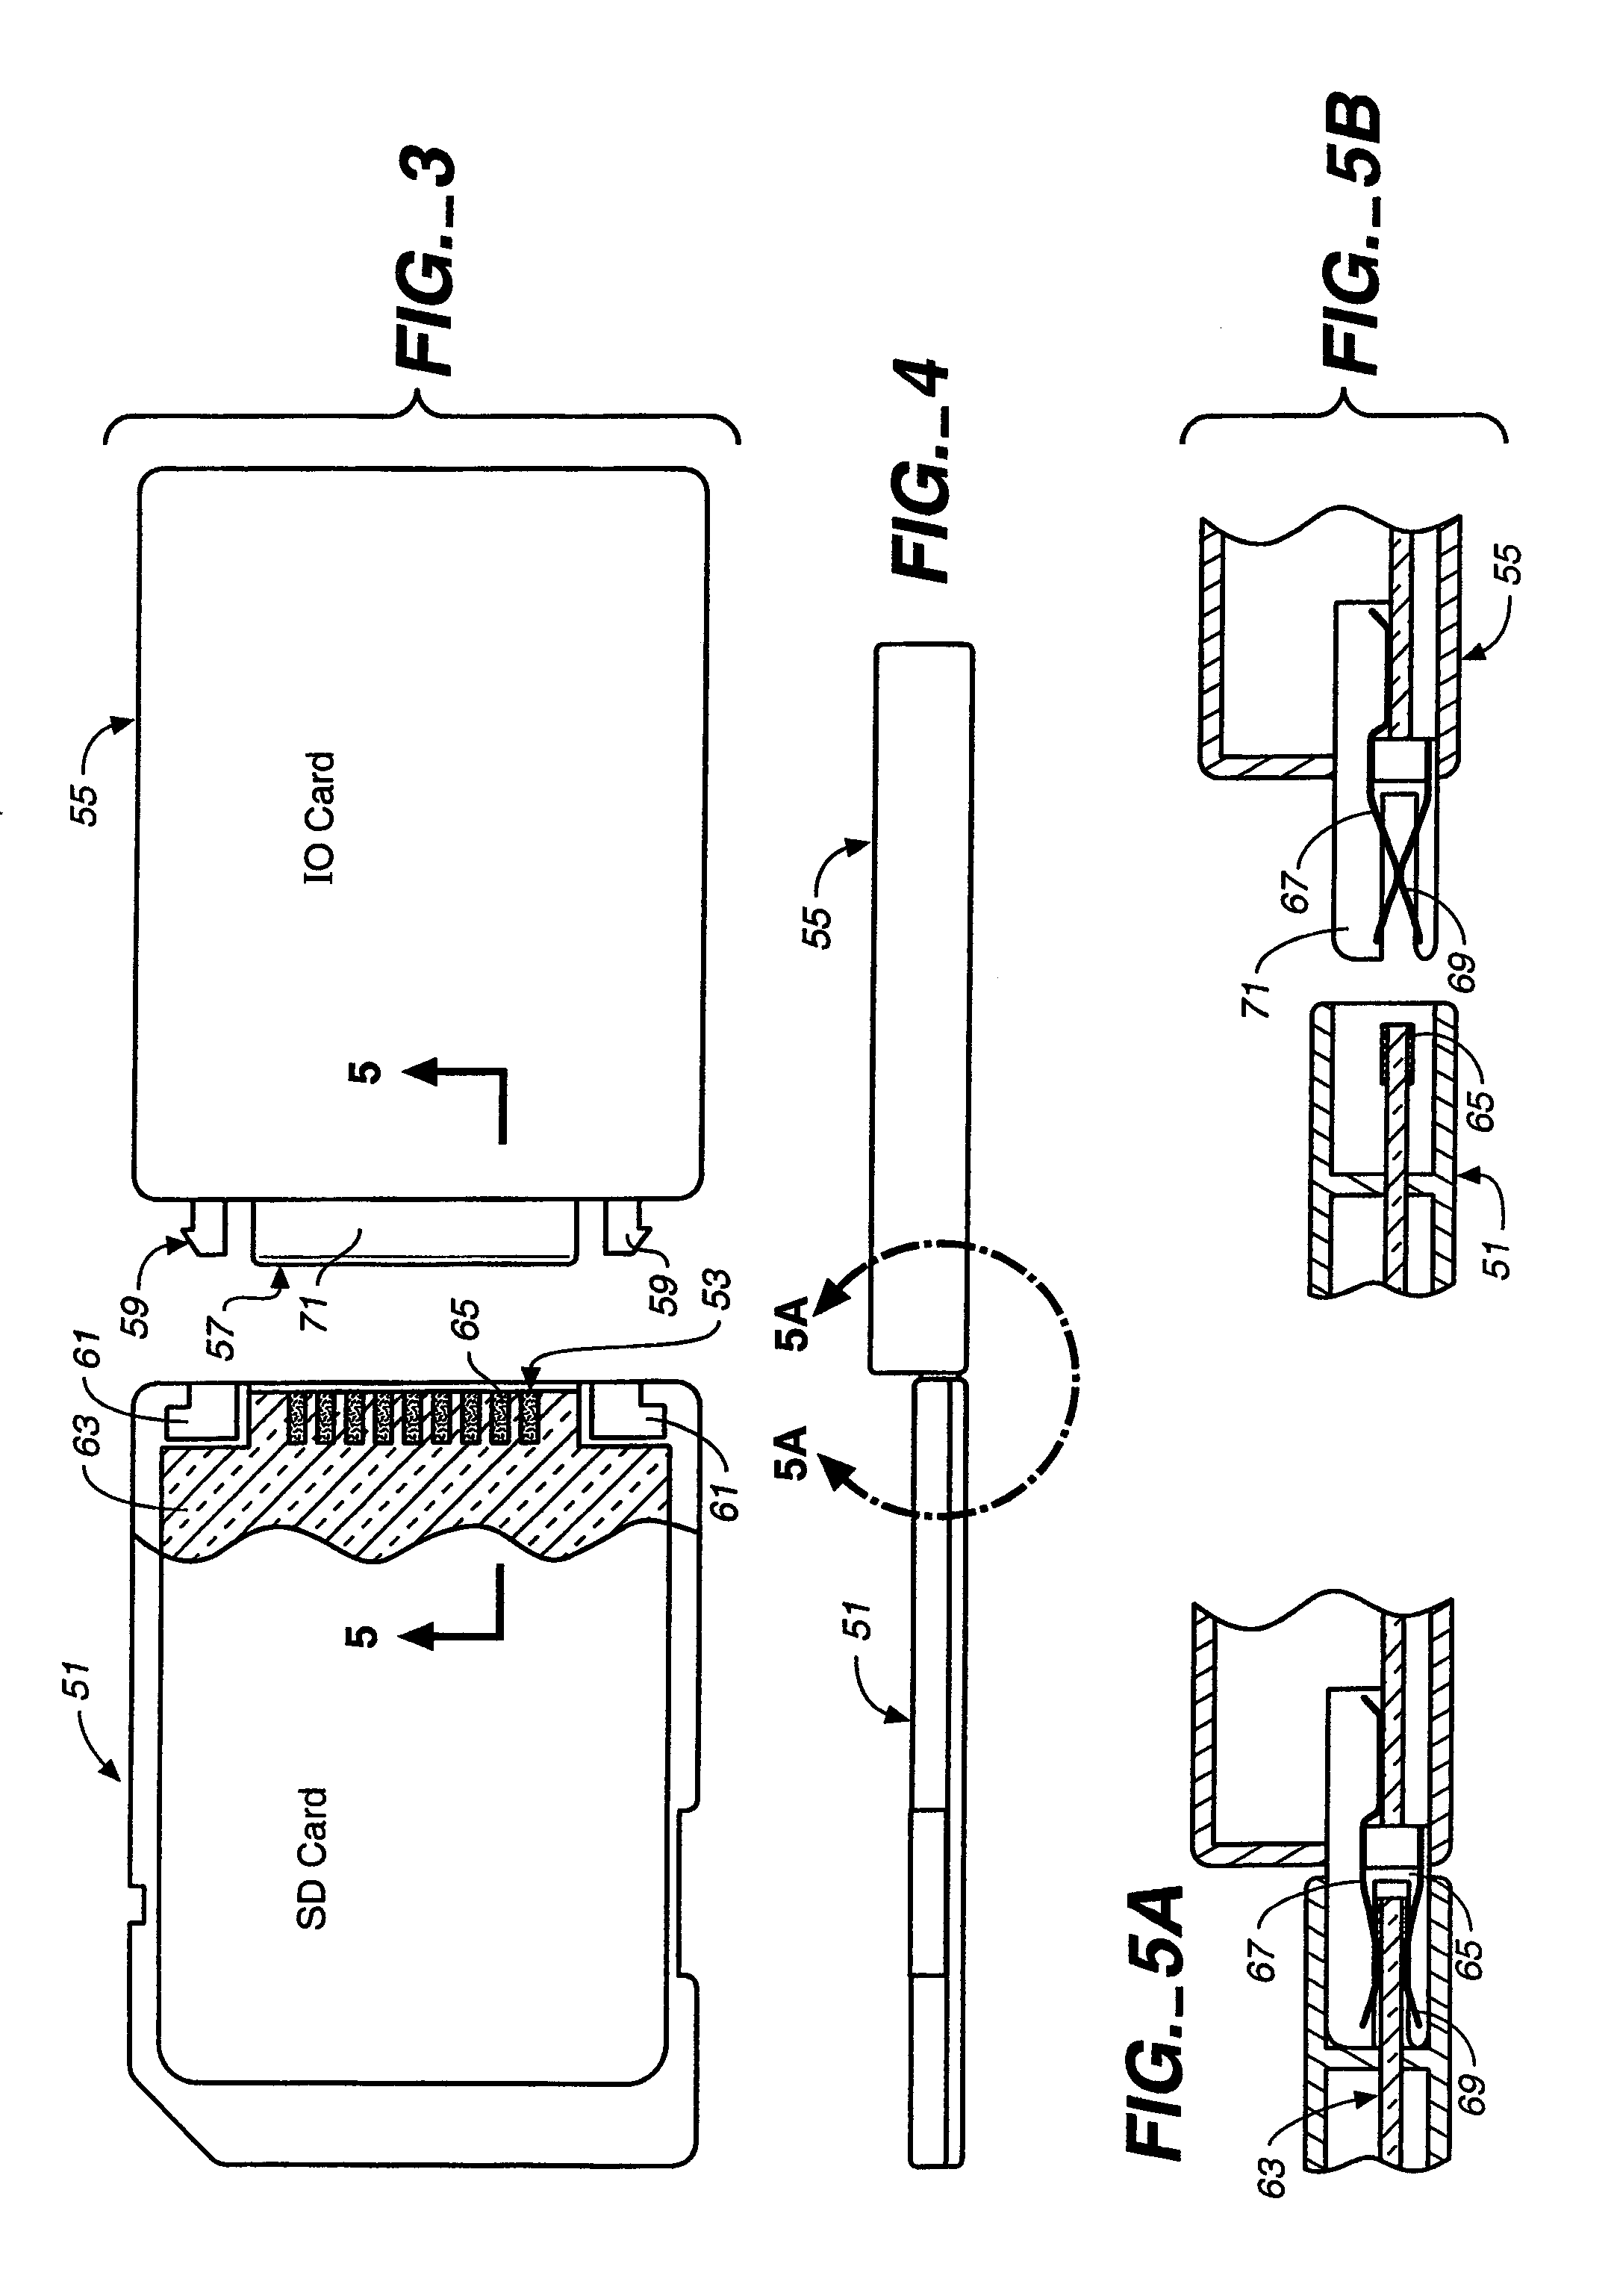 Cooperative interconnection and operation of a non-volatile memory card and an input-output card